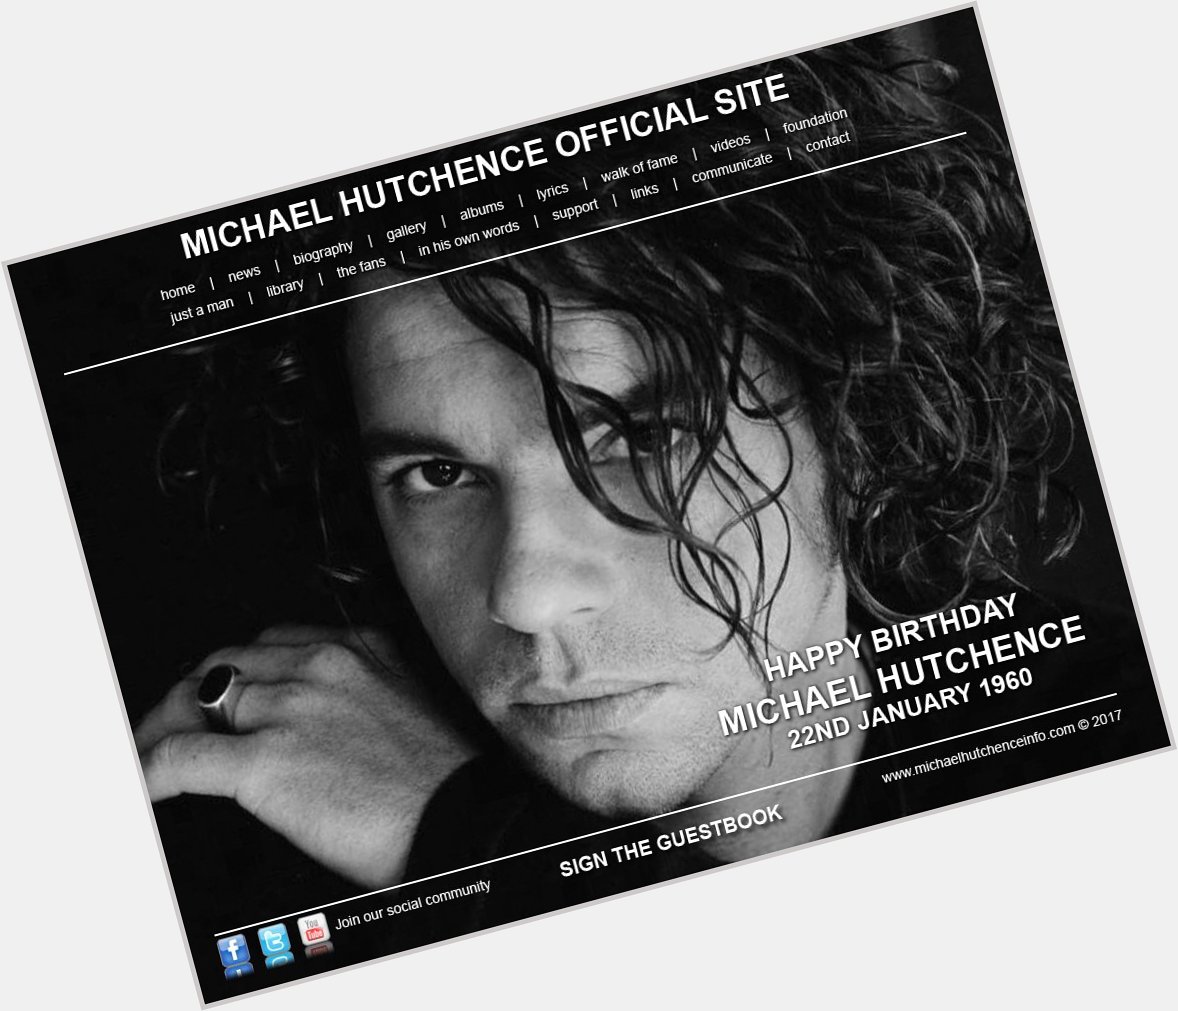 Happy birthday Michael Hutchence would have been 57 today 